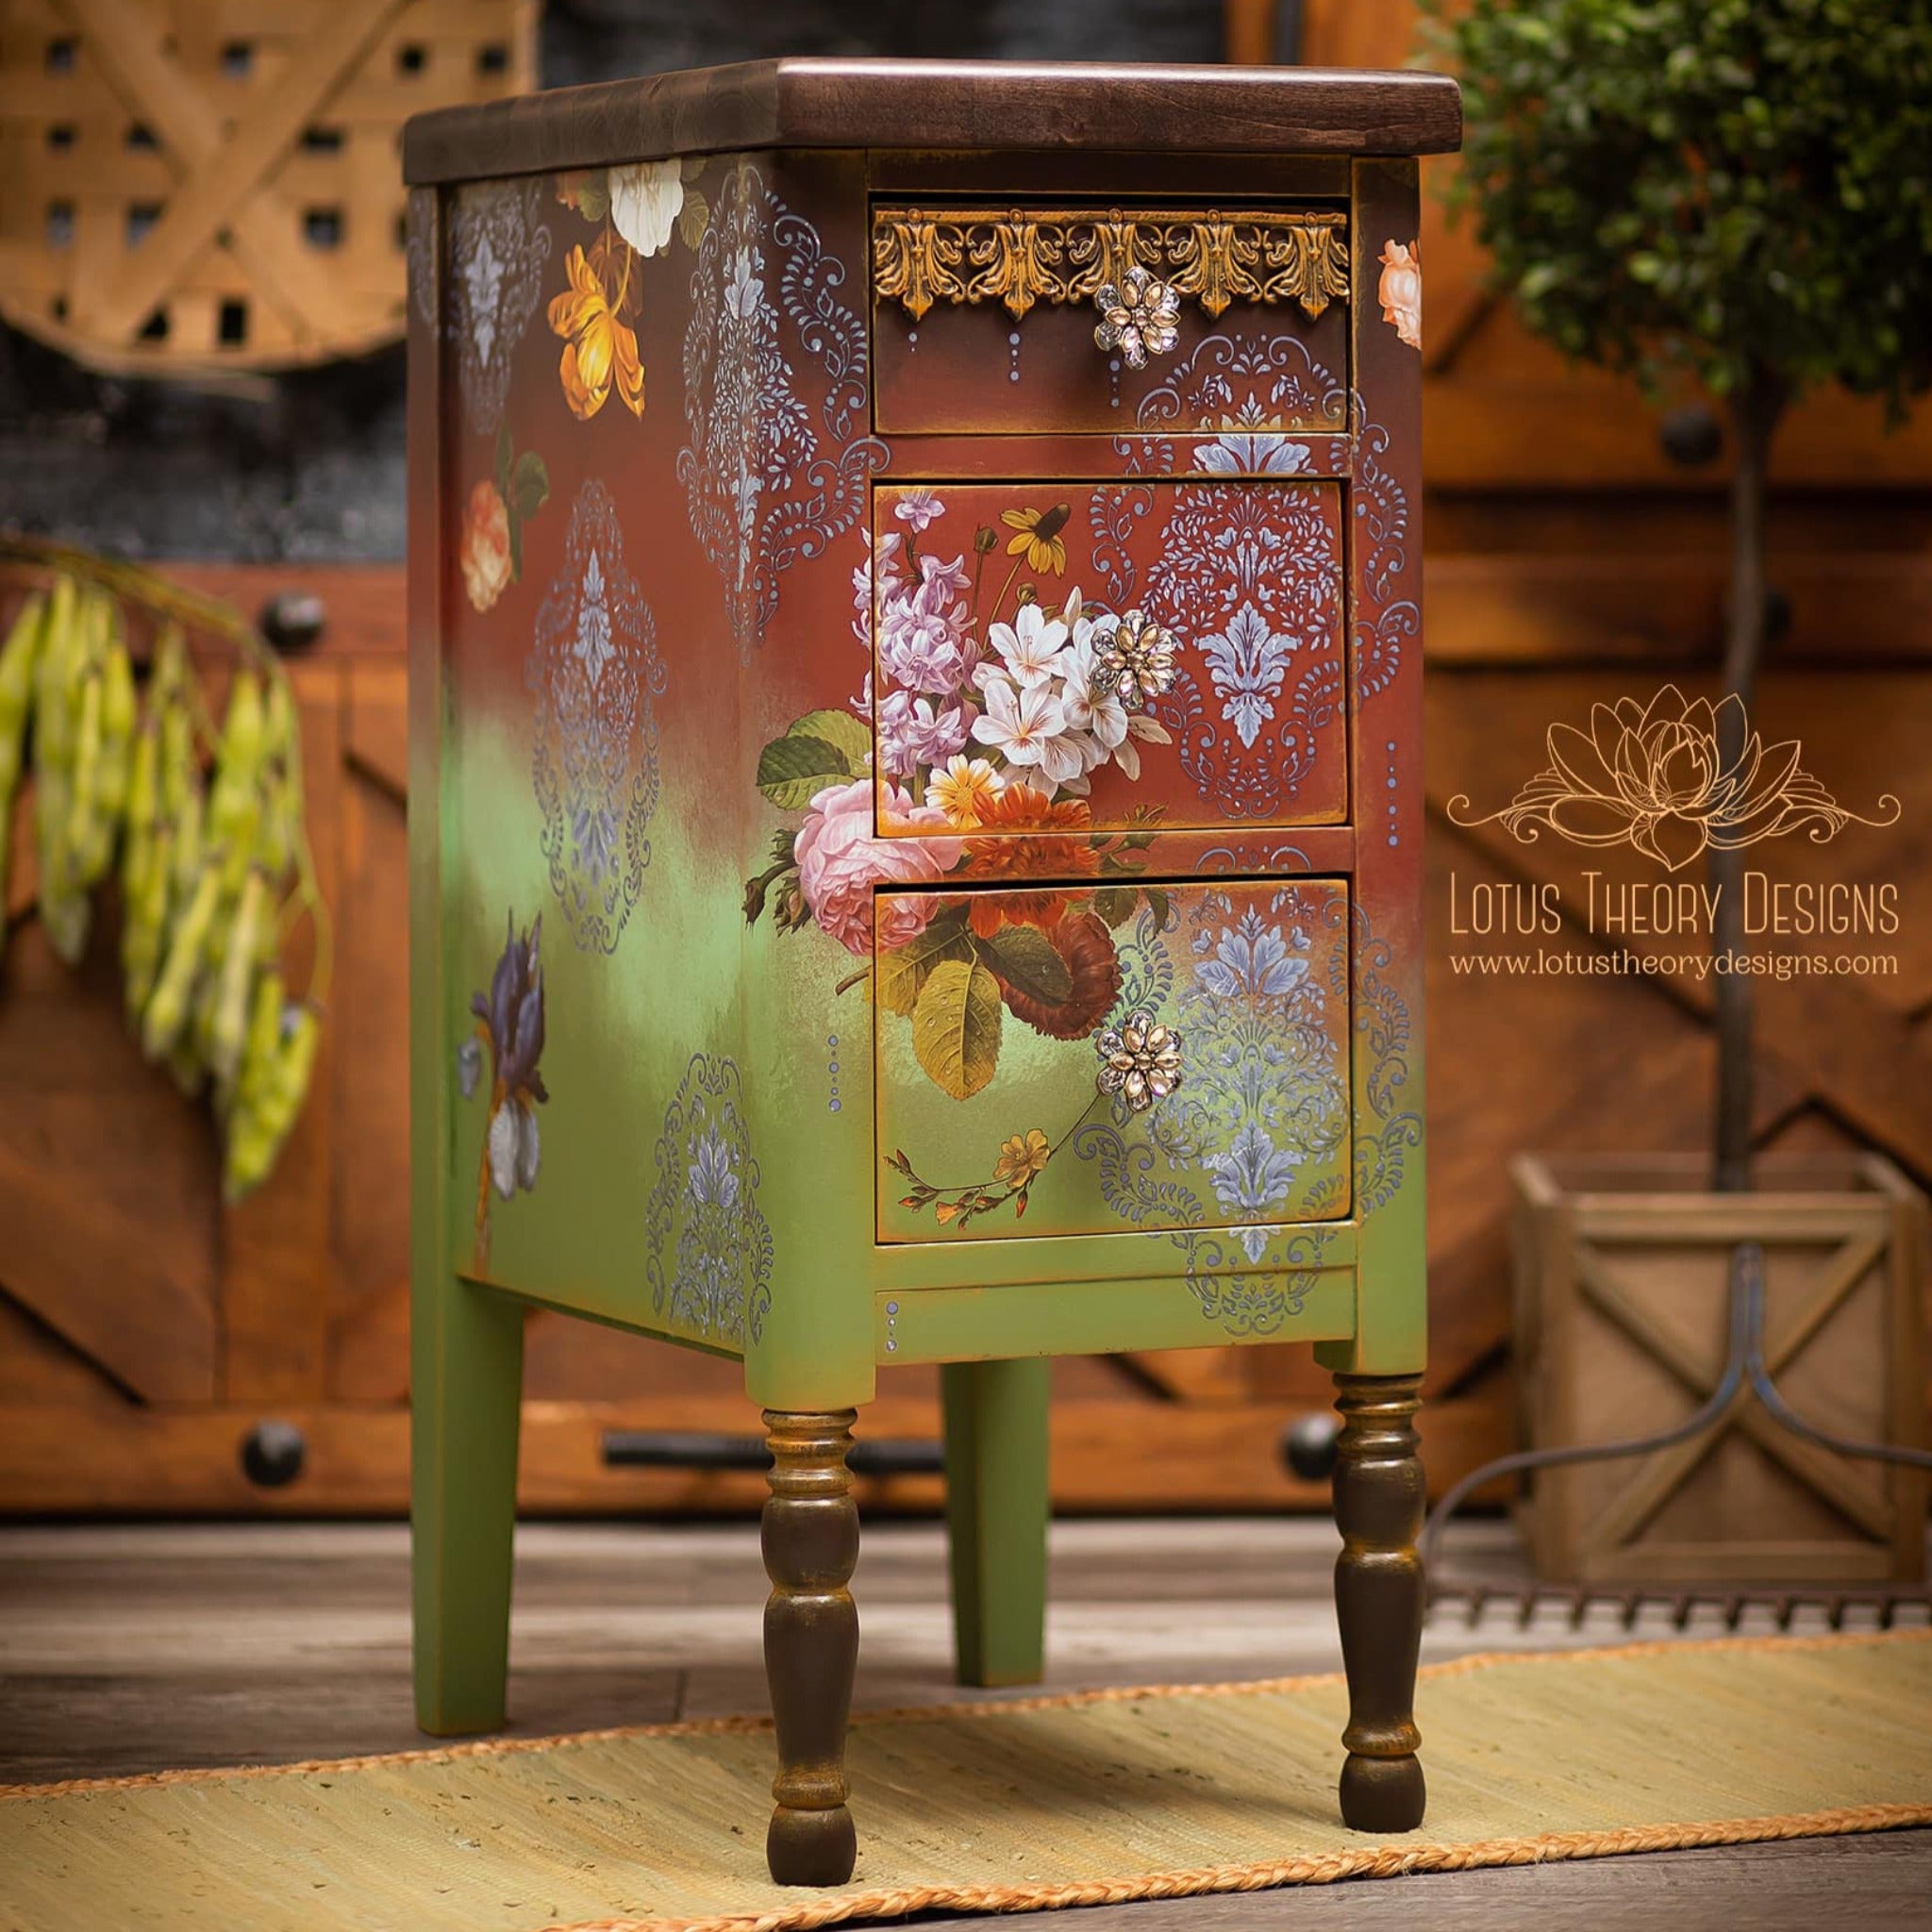 A small 3-drawer vintage night stand refurbished by Lotus Theory Designs is painted an ombre of brown down to Spring green and features ReDesign with Prima's Blossomed Beauties small transfer on it.